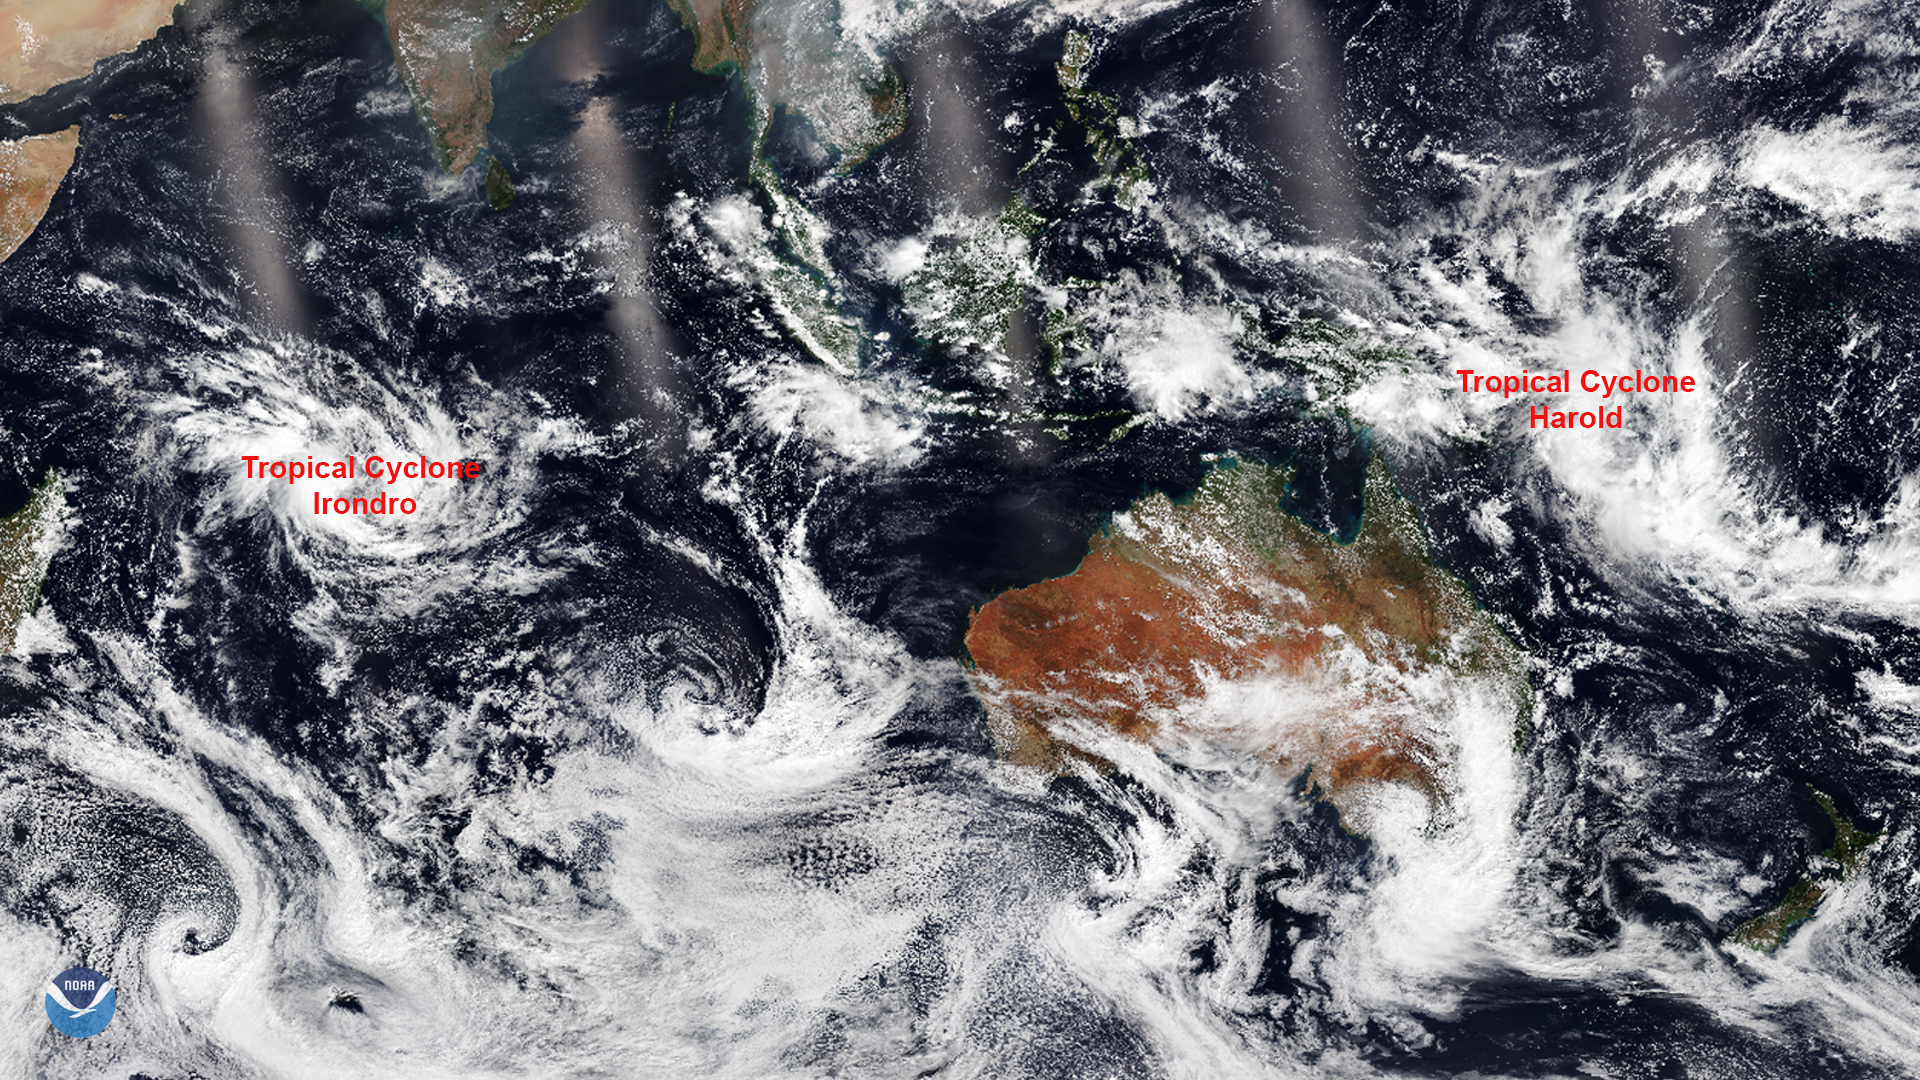 NOAA-20 Sees Two Cyclones Developing in the Southern Hemisphere